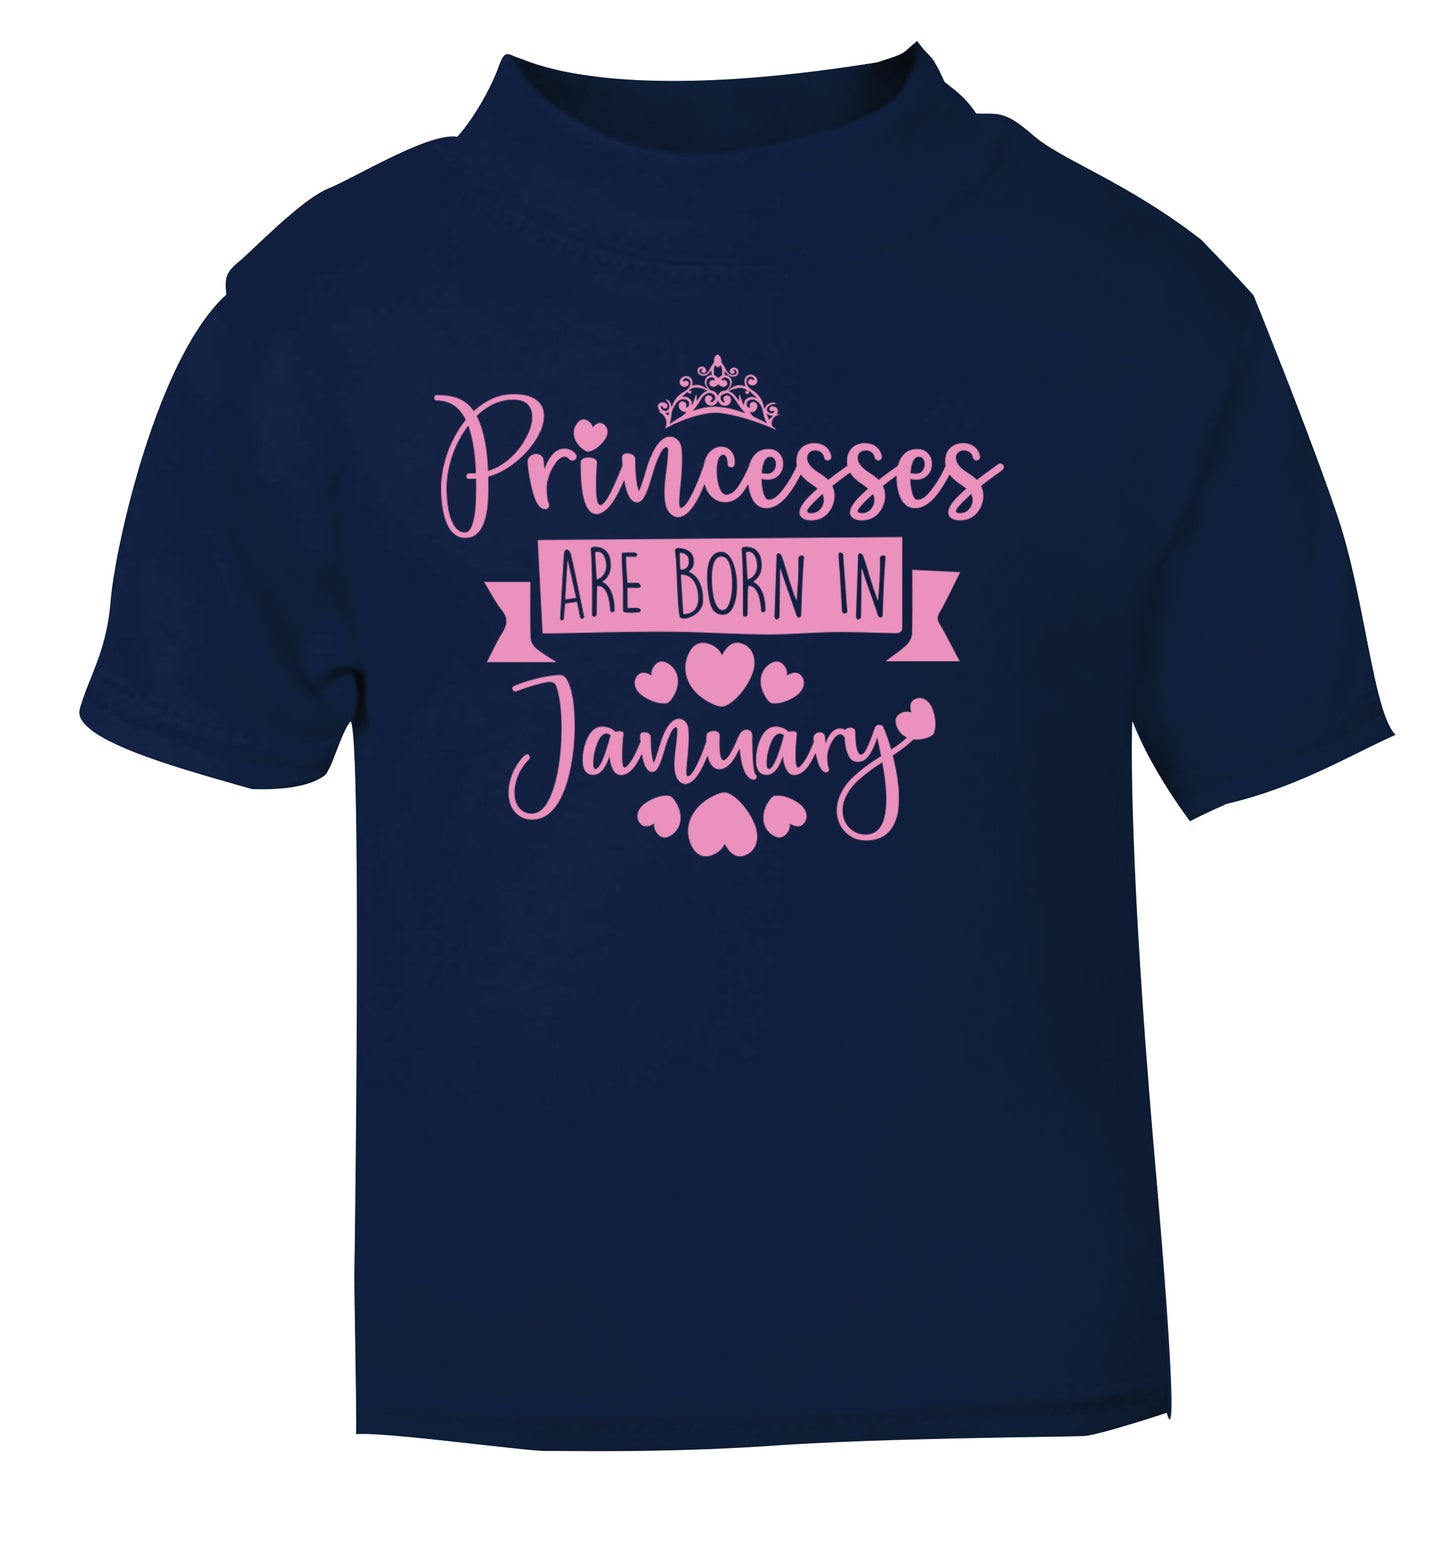 Princesses are born in January navy Baby Toddler Tshirt 2 Years